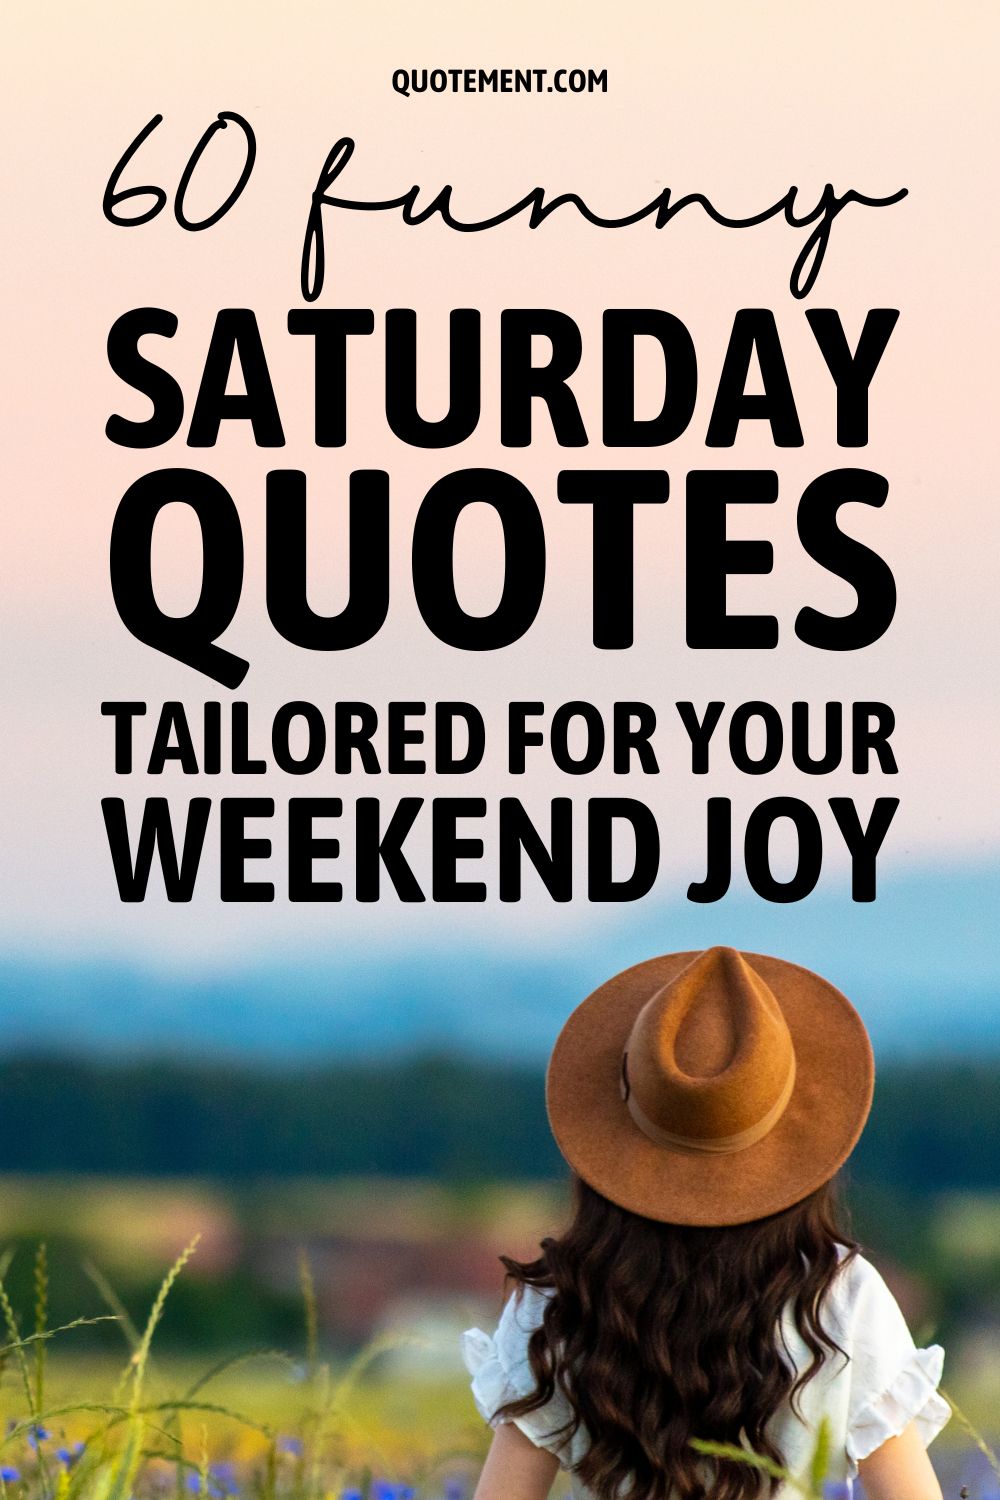 60 Funny Saturday Quotes Tailored For Your Weekend Joy 